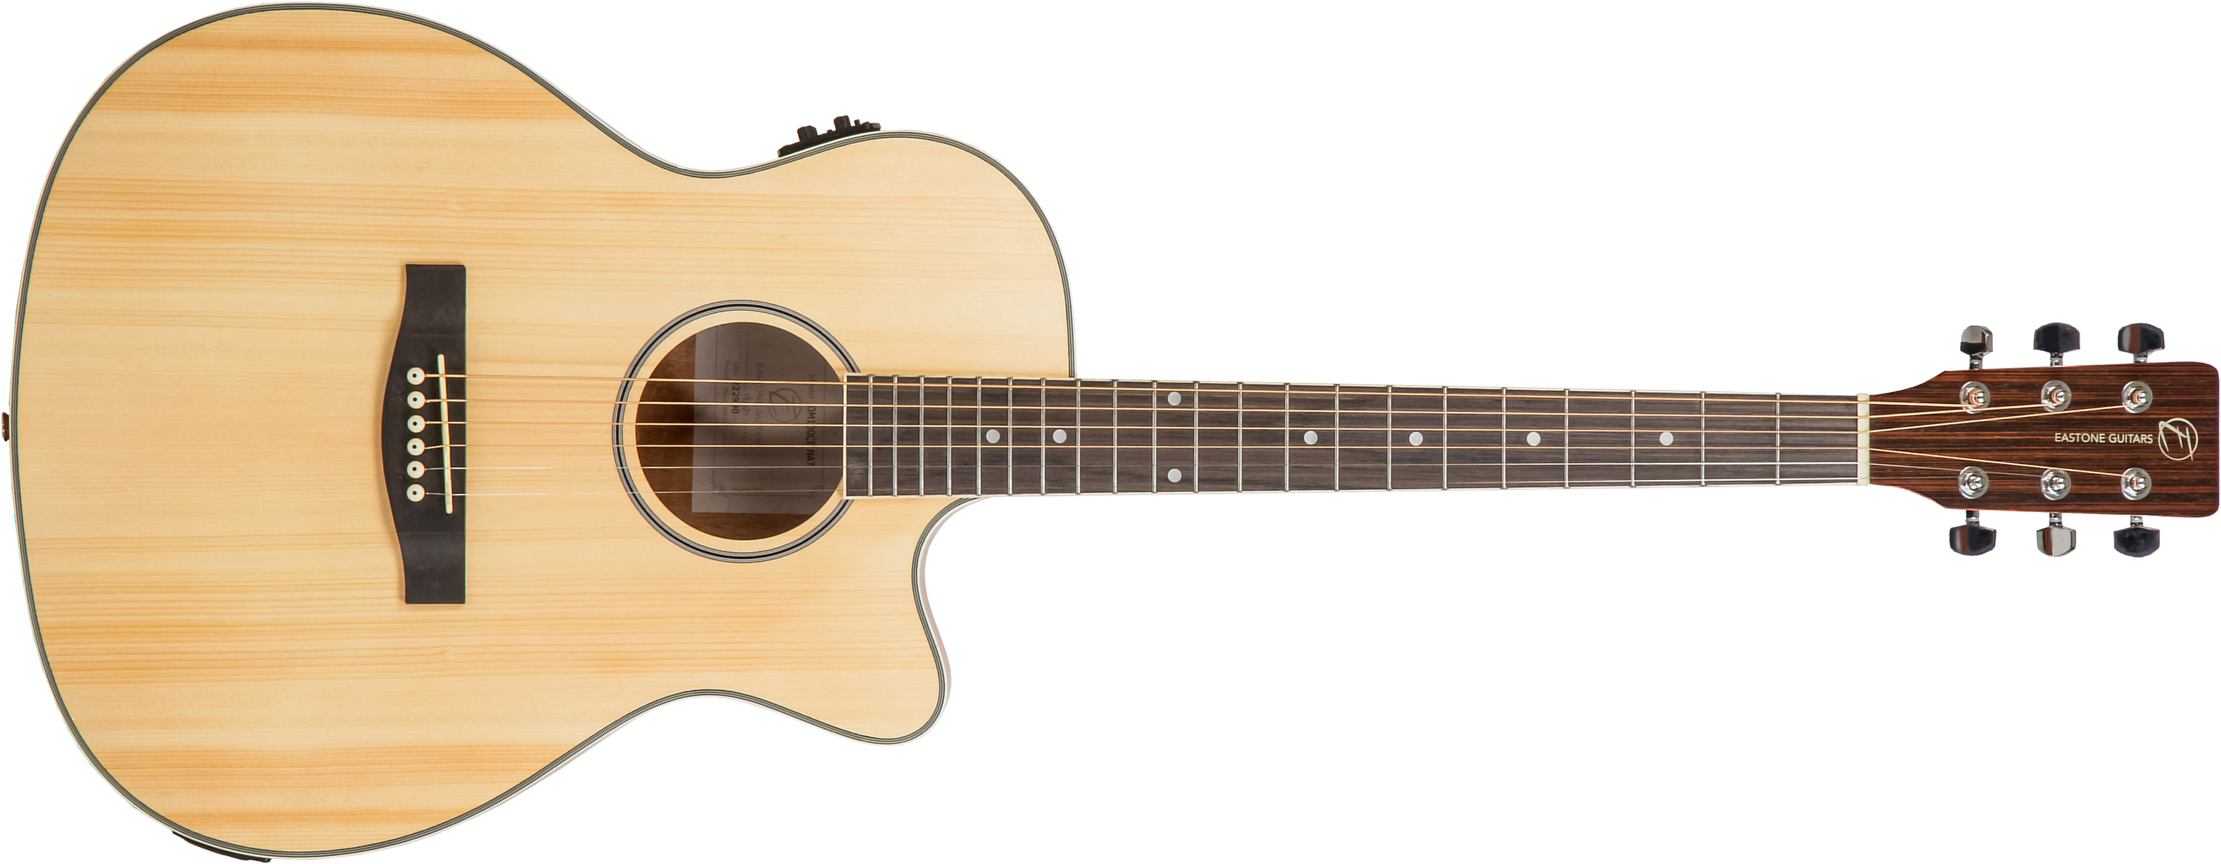 Eastone Om100ce-nat Orchestra Model Cw Epicea Okuman - Natural Satin - Electro acoustic guitar - Main picture